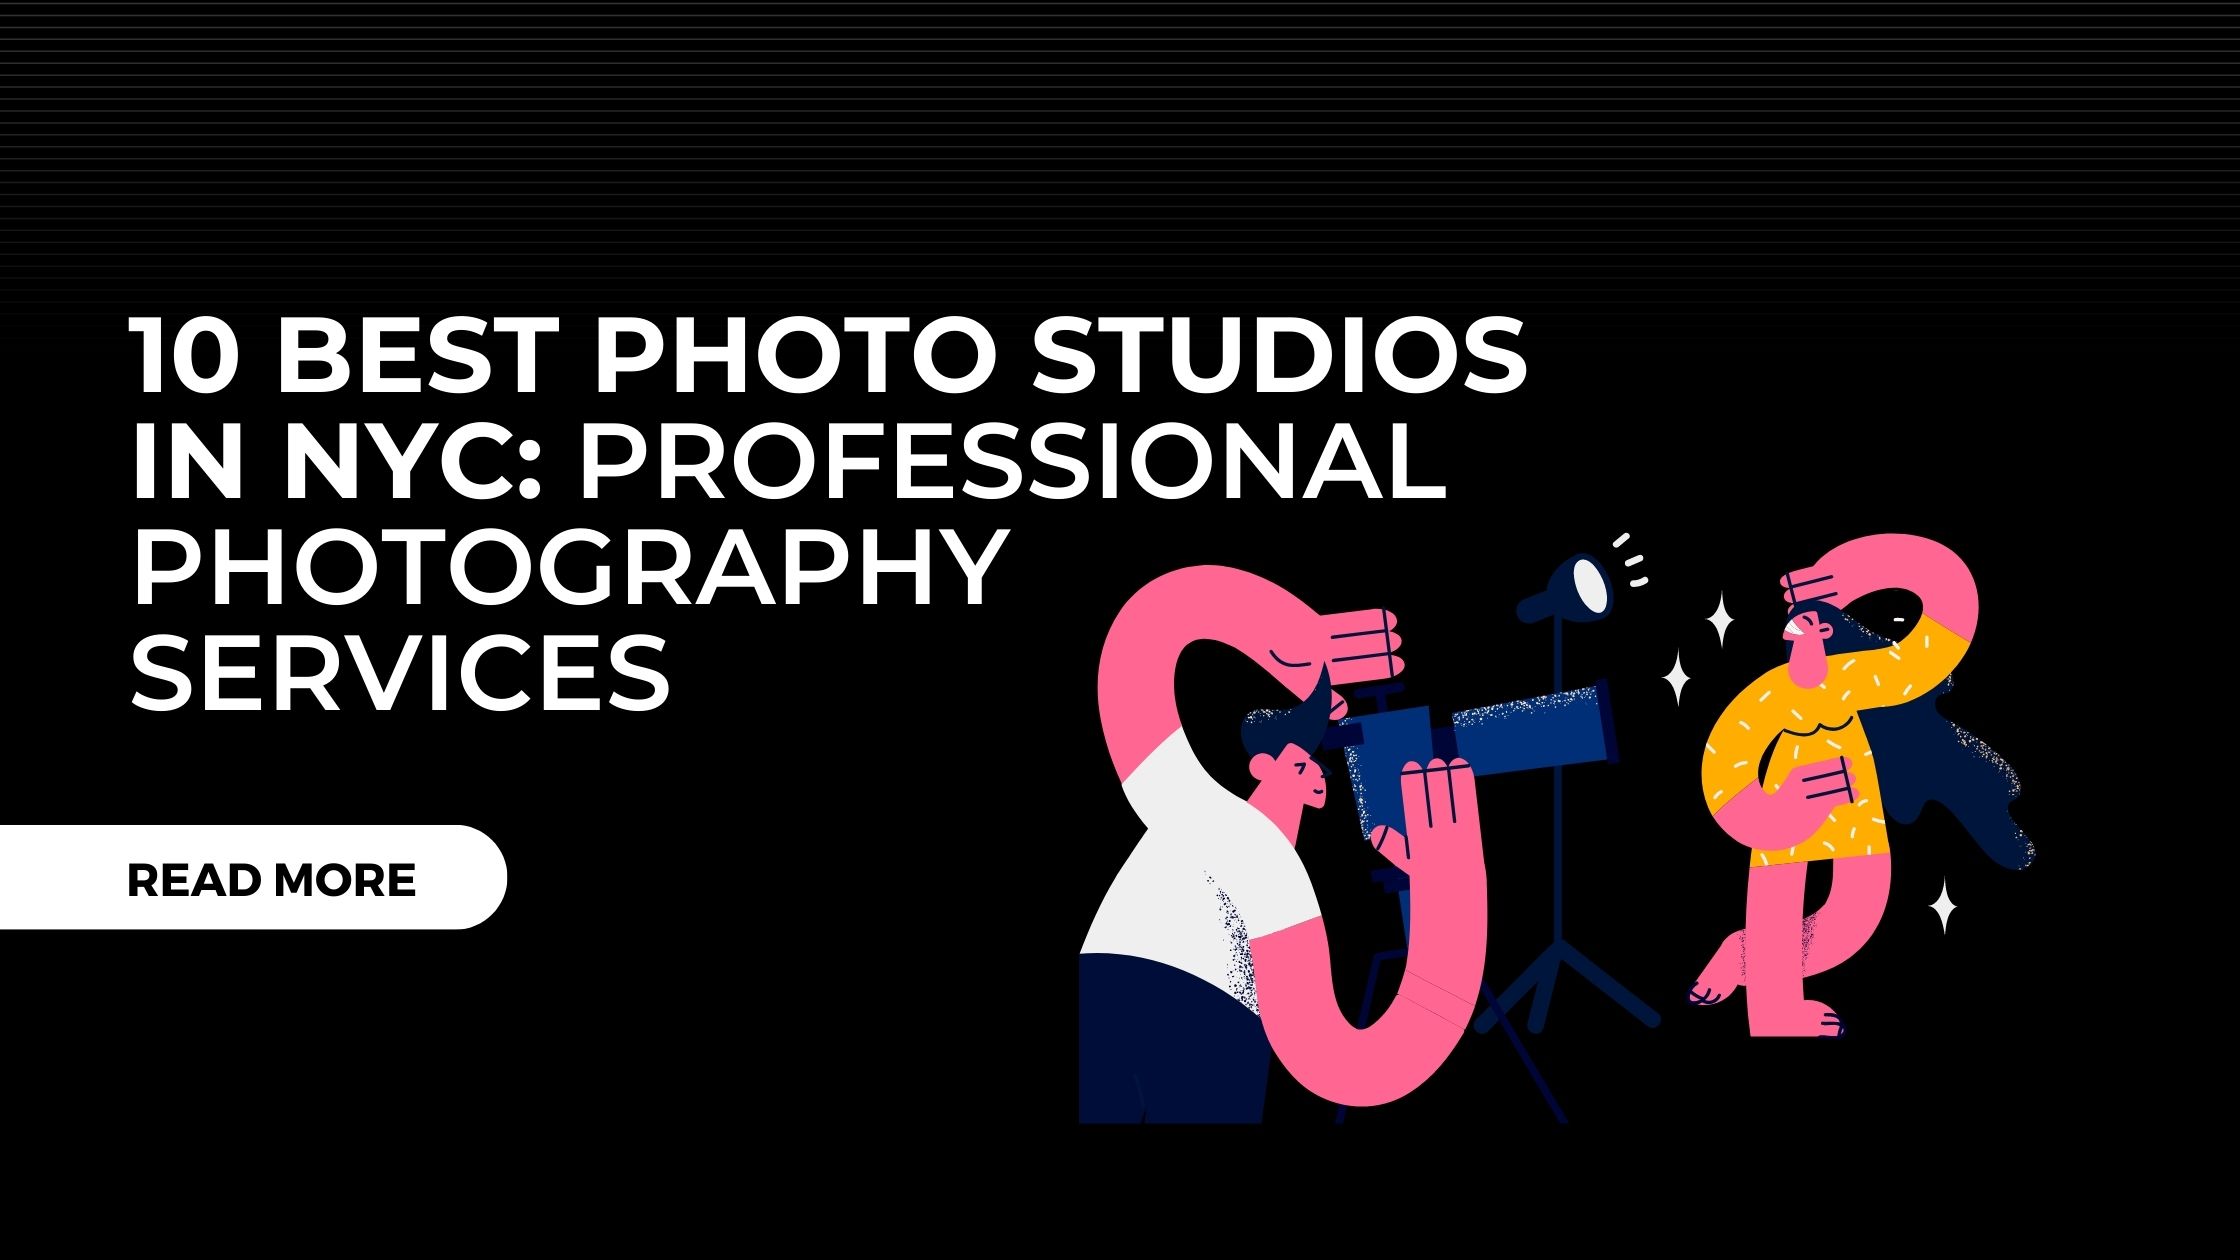 10 Best Photo Studios in NYC Professional Photography Services